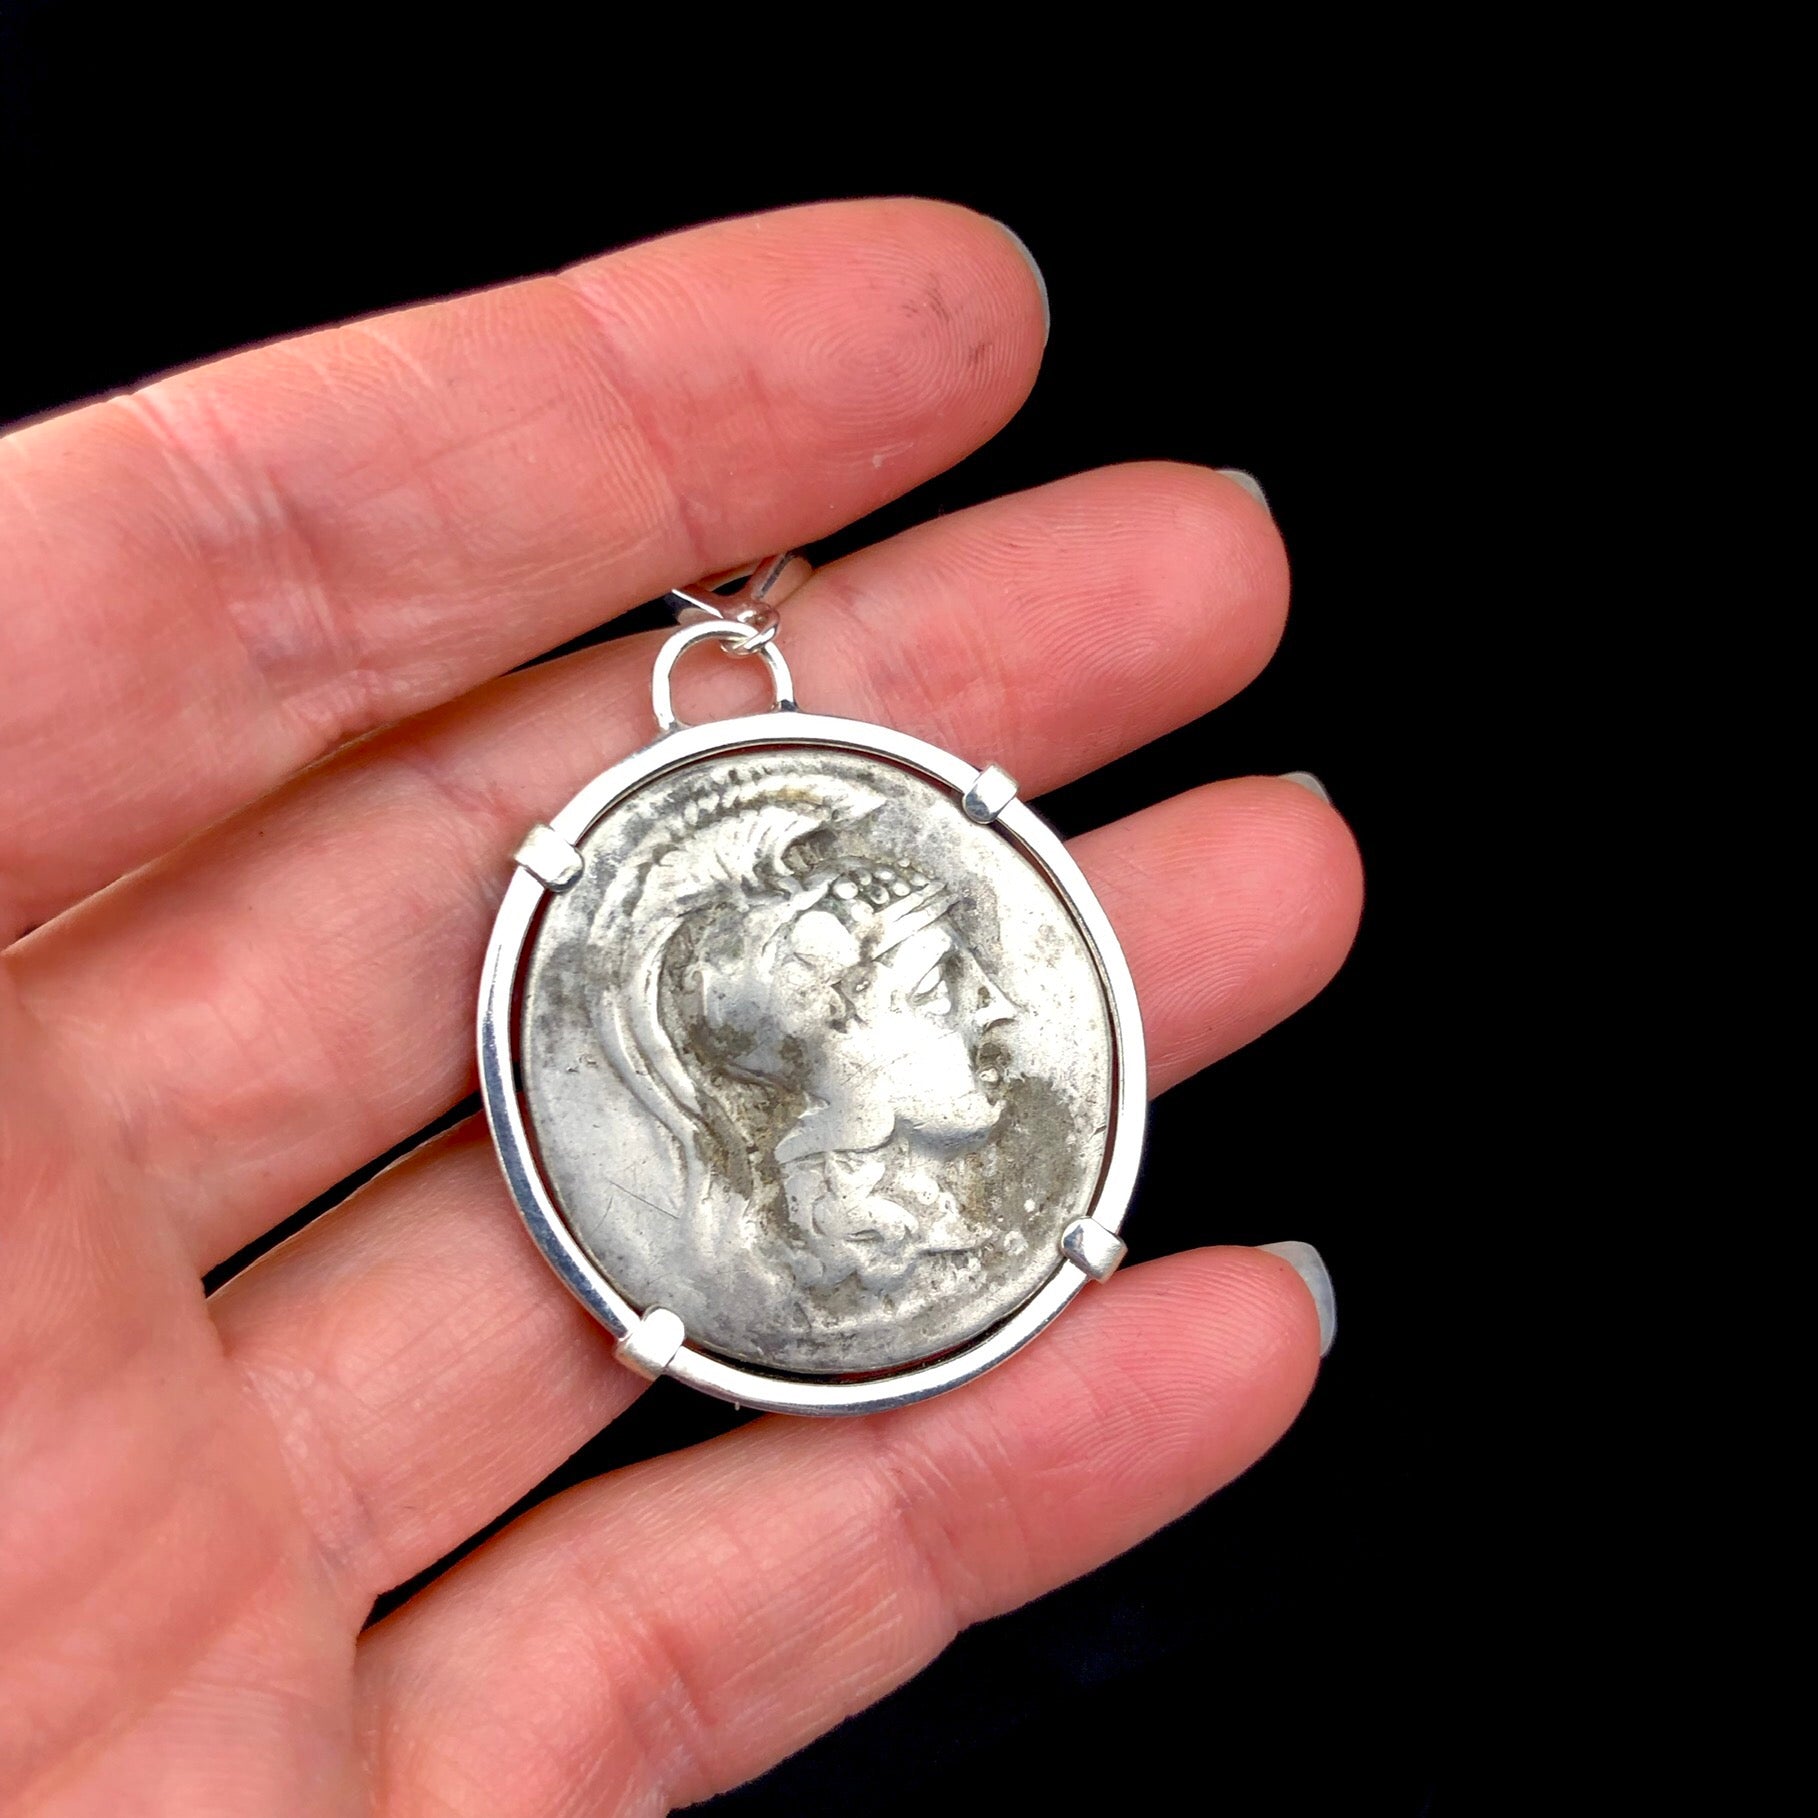 New Style Athena Tetradrachm Coin Pendent shown in hand